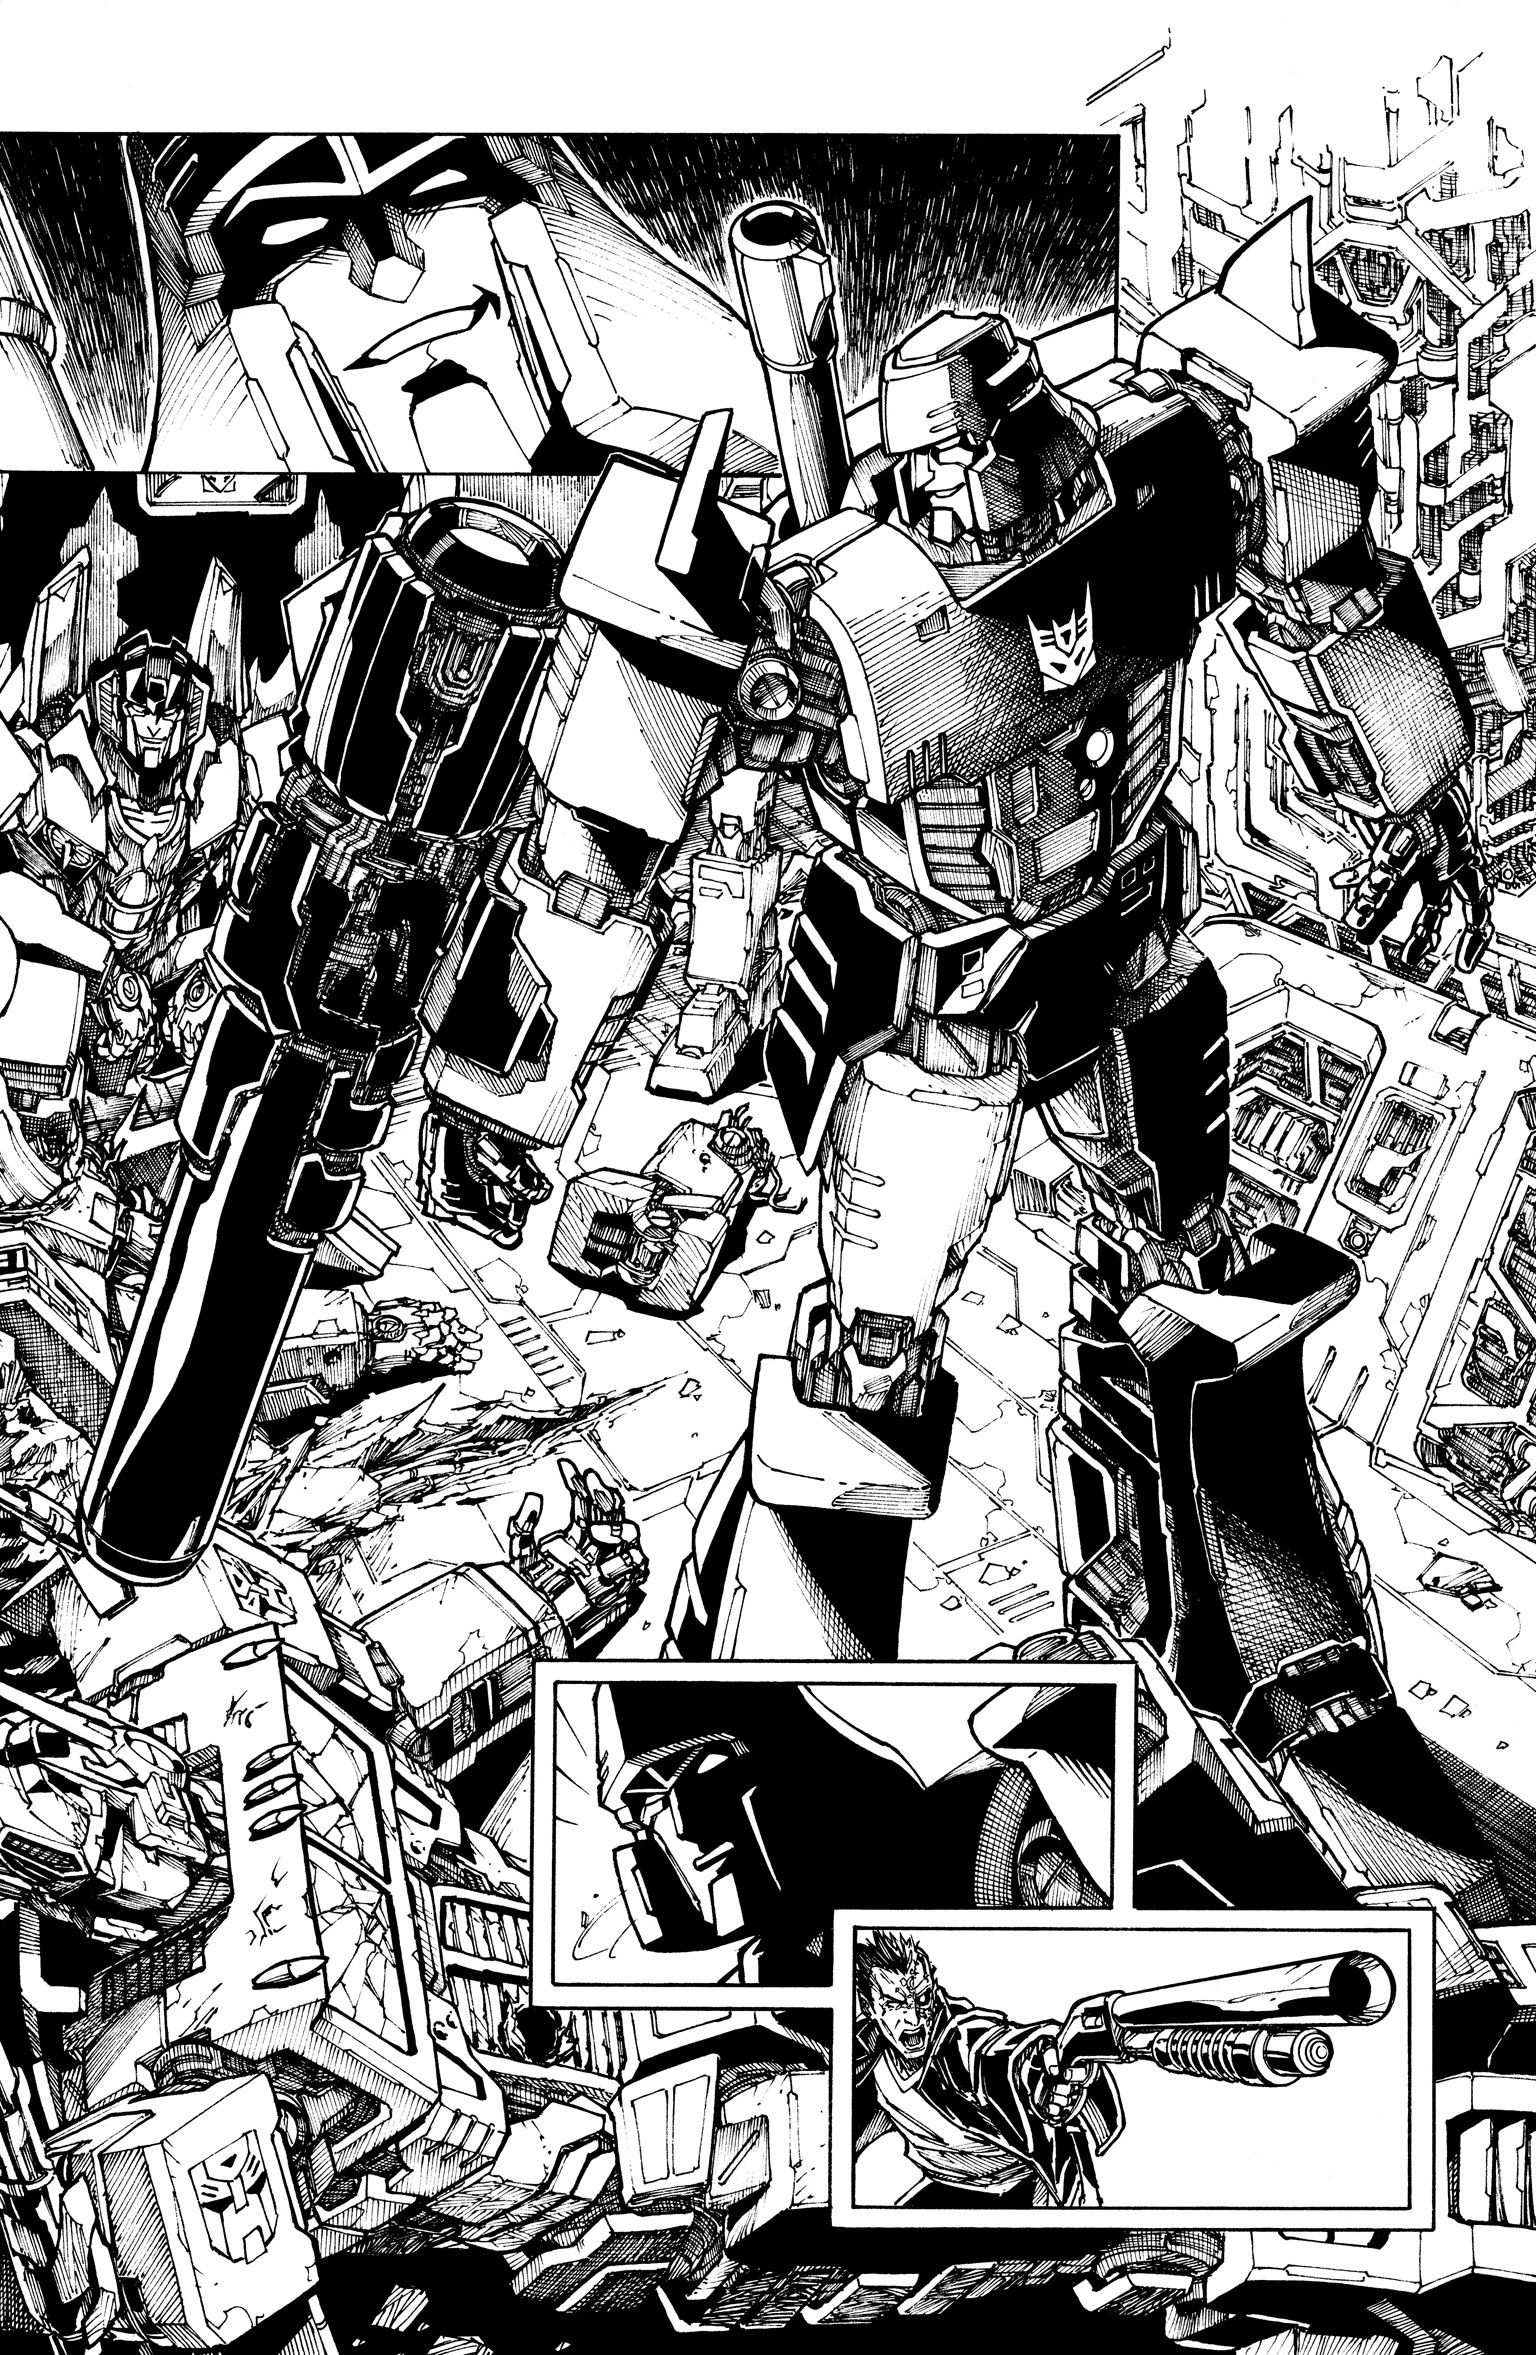 Transformers News: IDW Transformers Comics News with new Milne covers and artwork + New gorgeous Nick Roche cover